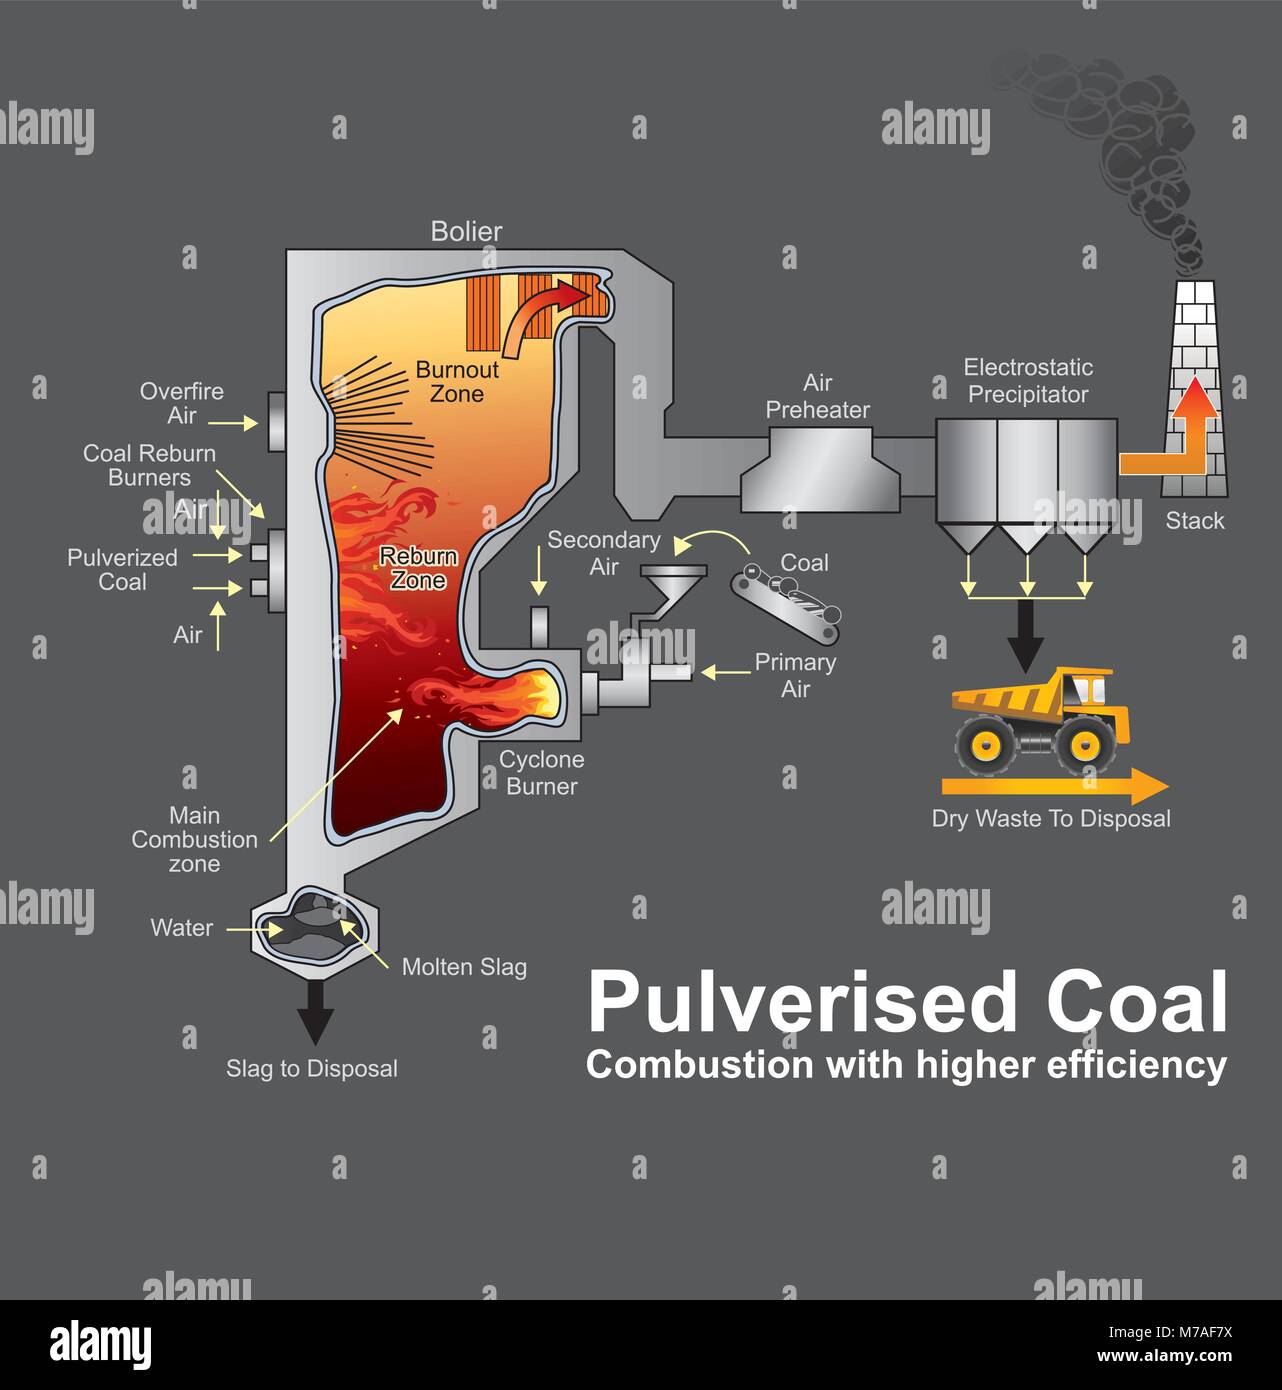 A pulverized coalfired boiler is an industrial or utility boiler that